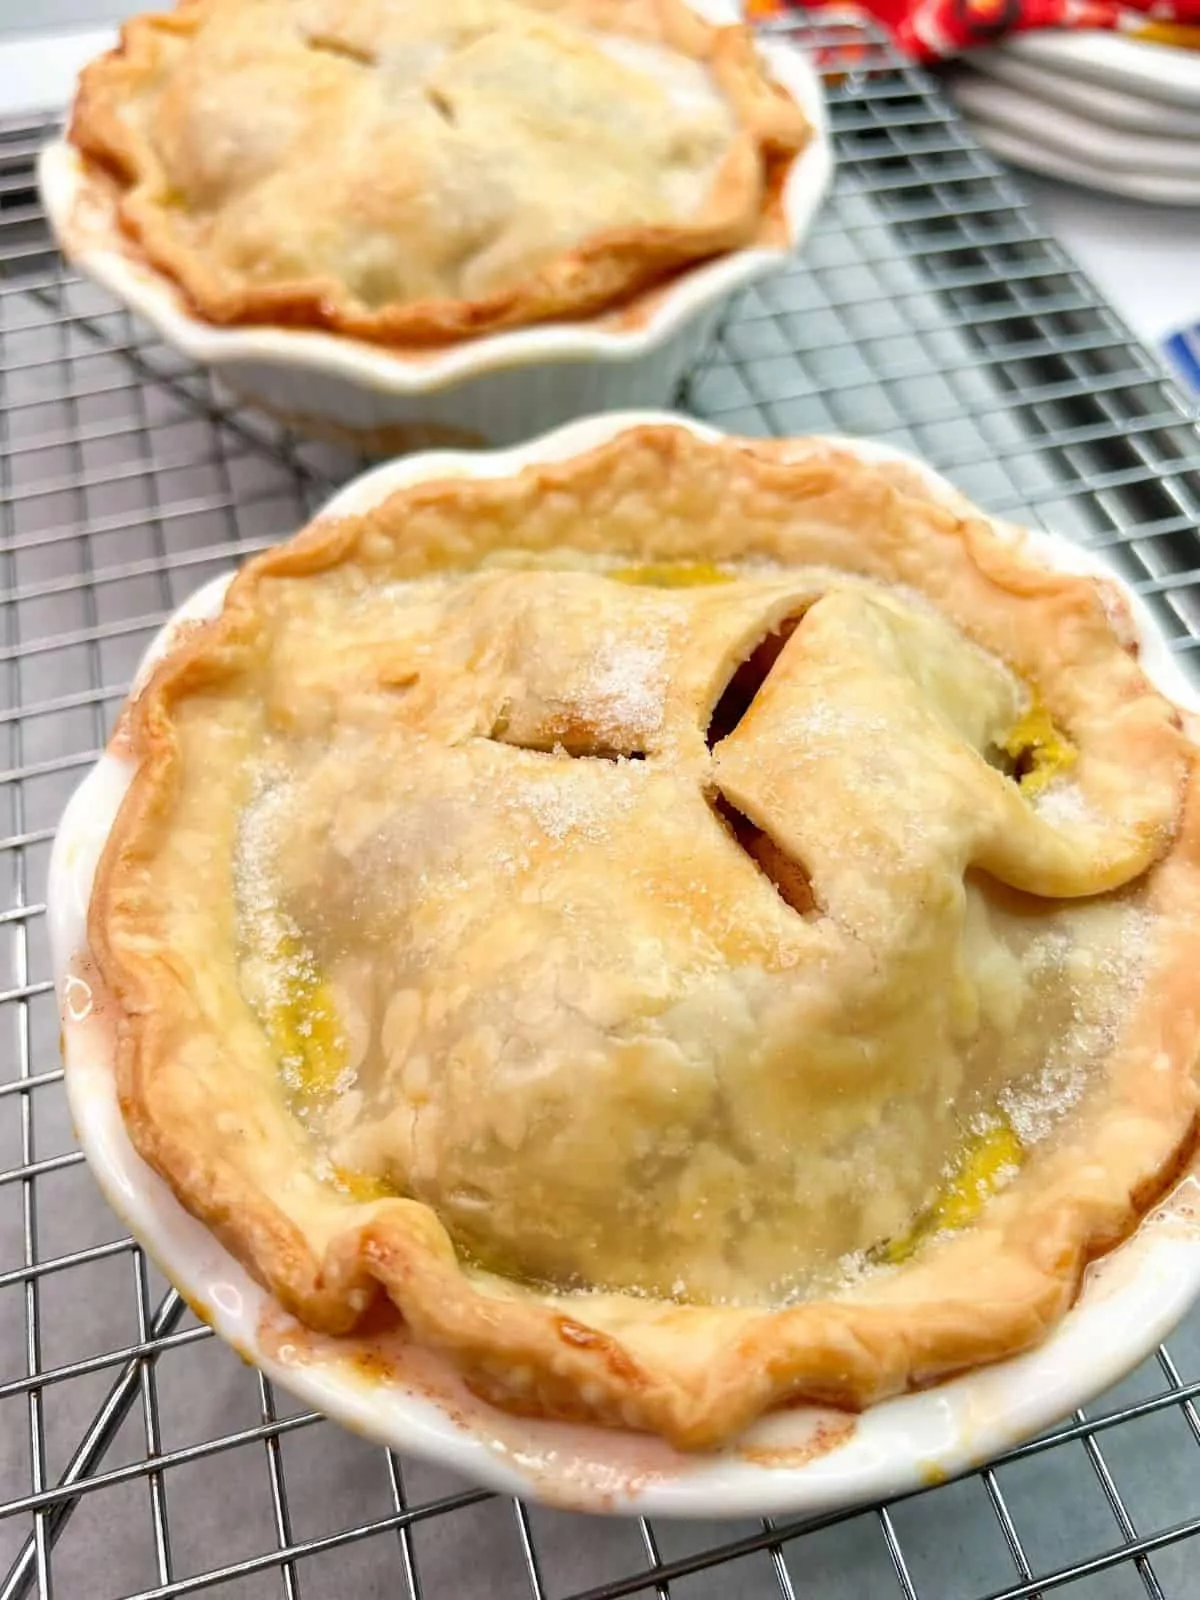 Baked individual apple pies.